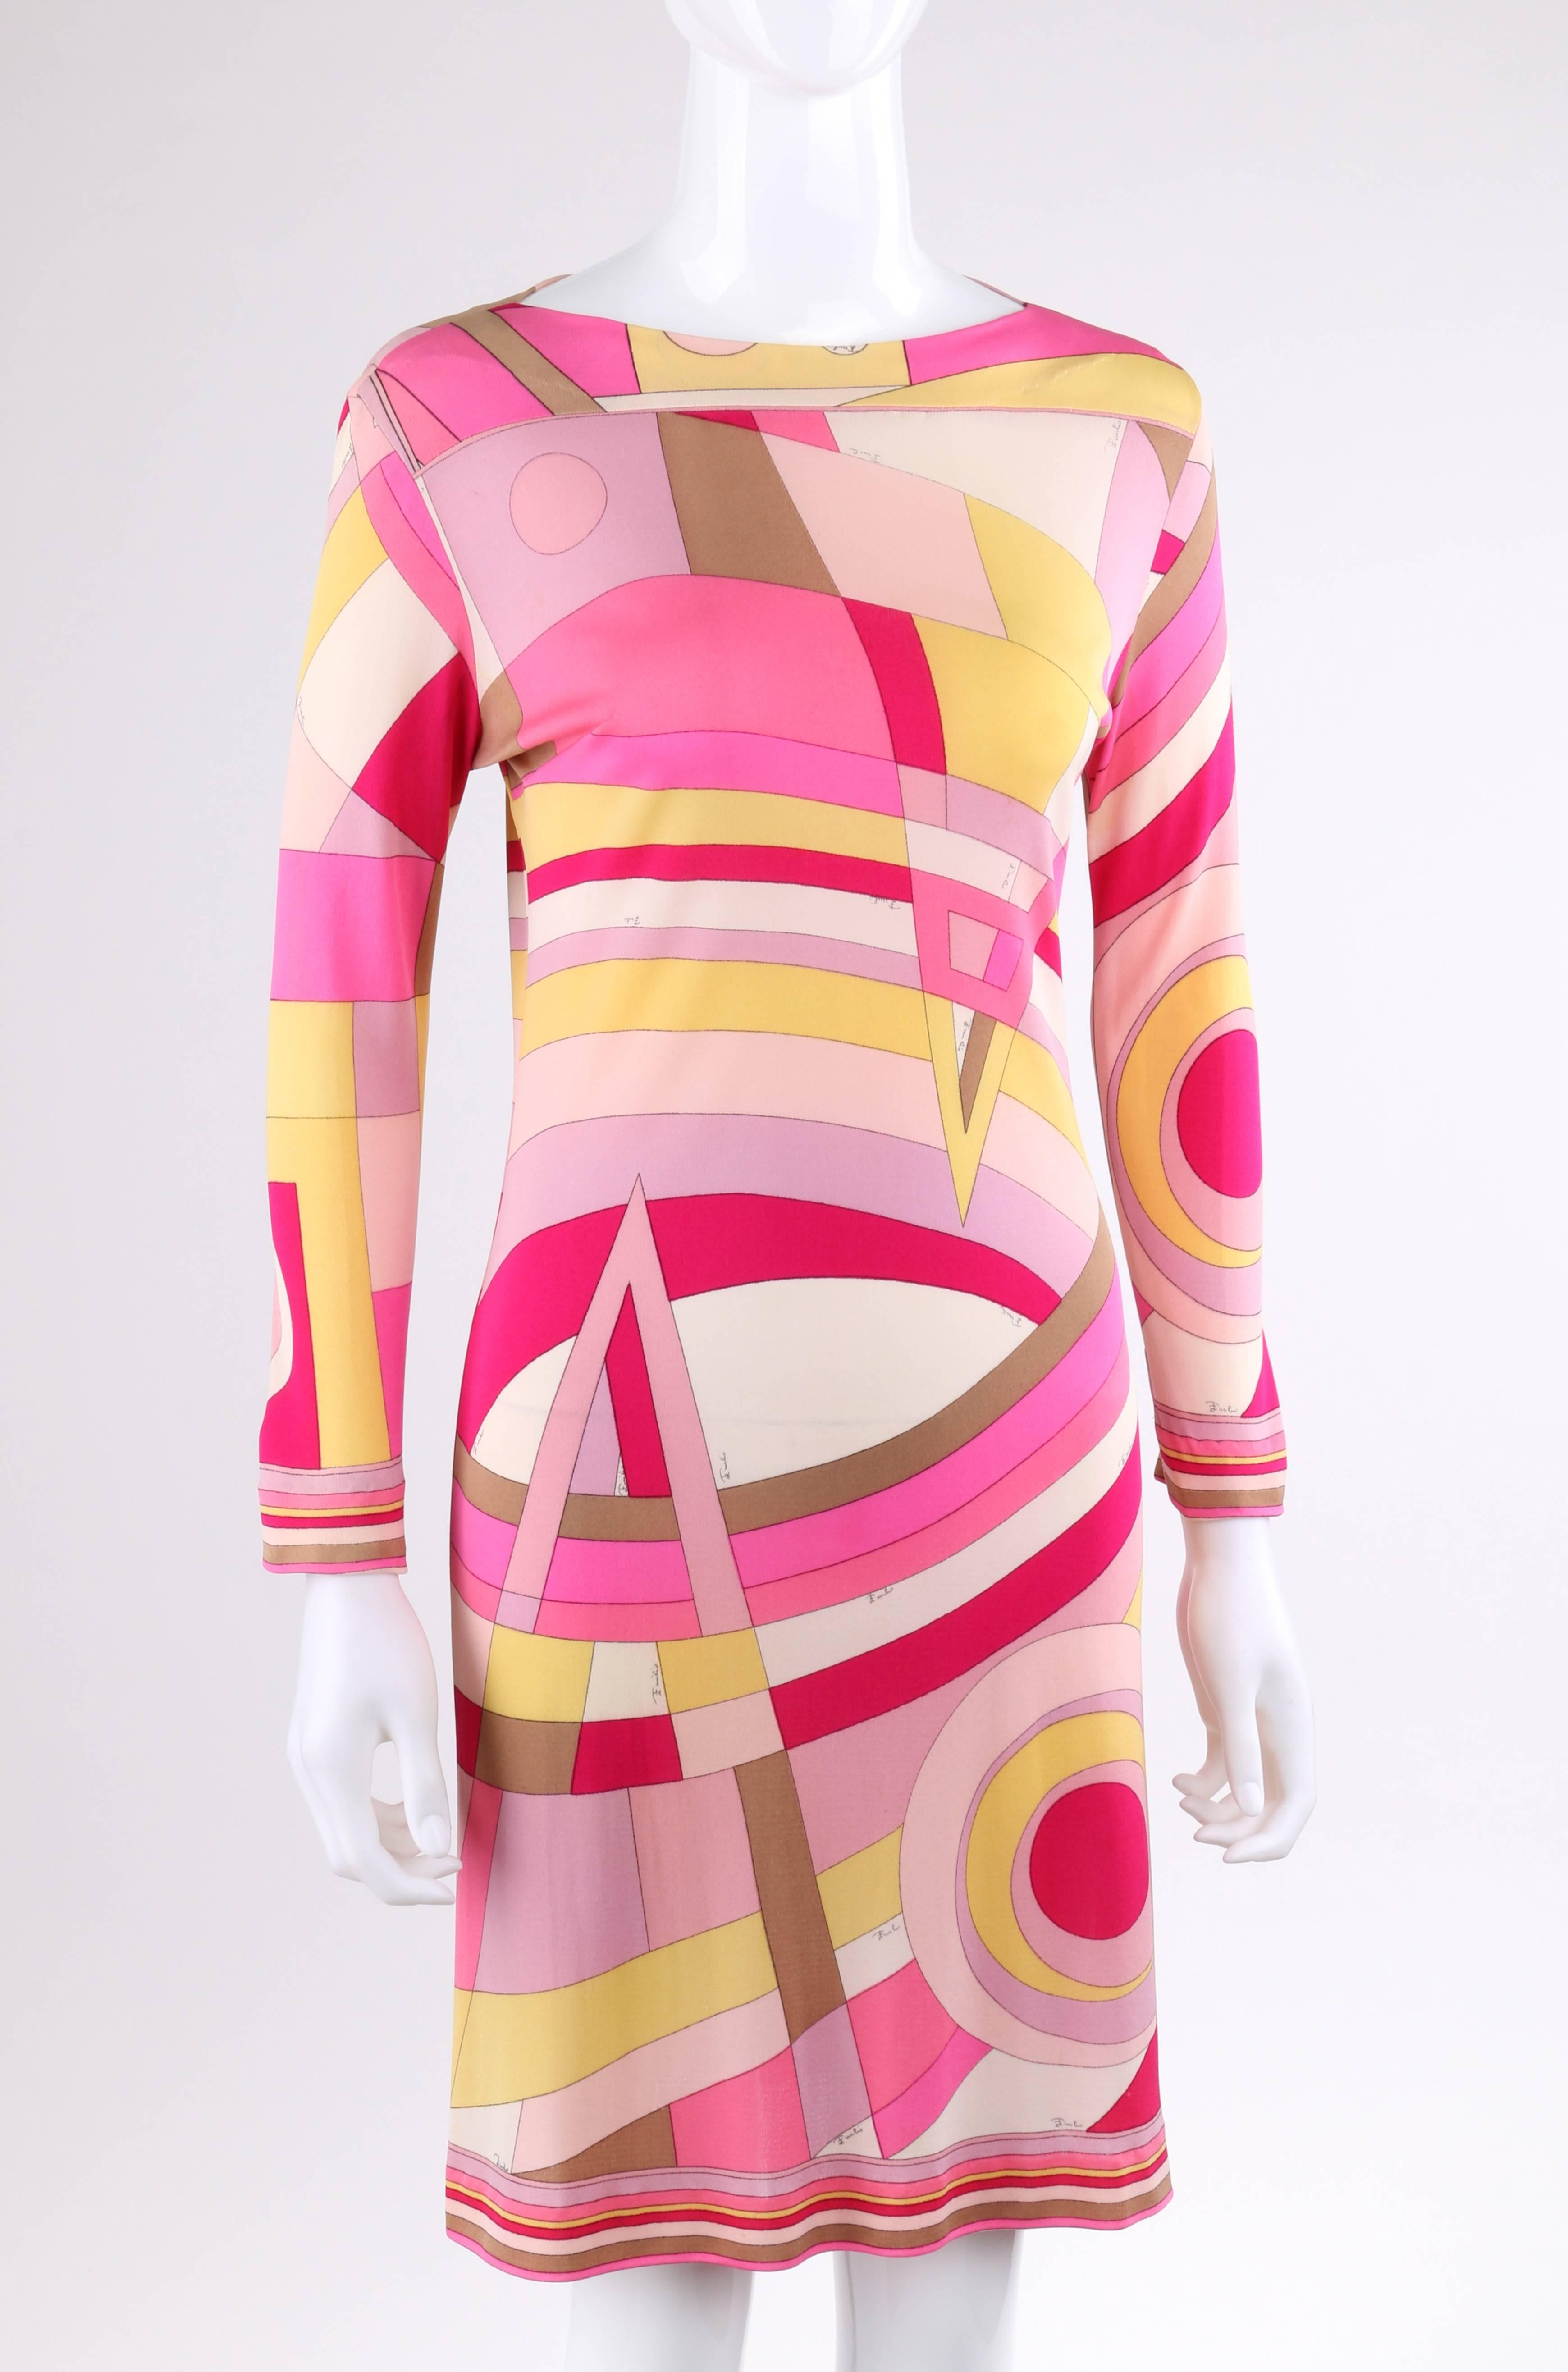 Vintage Emilio Pucci c.1968 silk jersey shift dress. Multicolor geometric op art signature print in shades of pink, yellow, fuchsia, and brown. Striped boarder print at cuffs and hemline. Bateau neckline. Long sleeves. Slip-on shift style. Marked